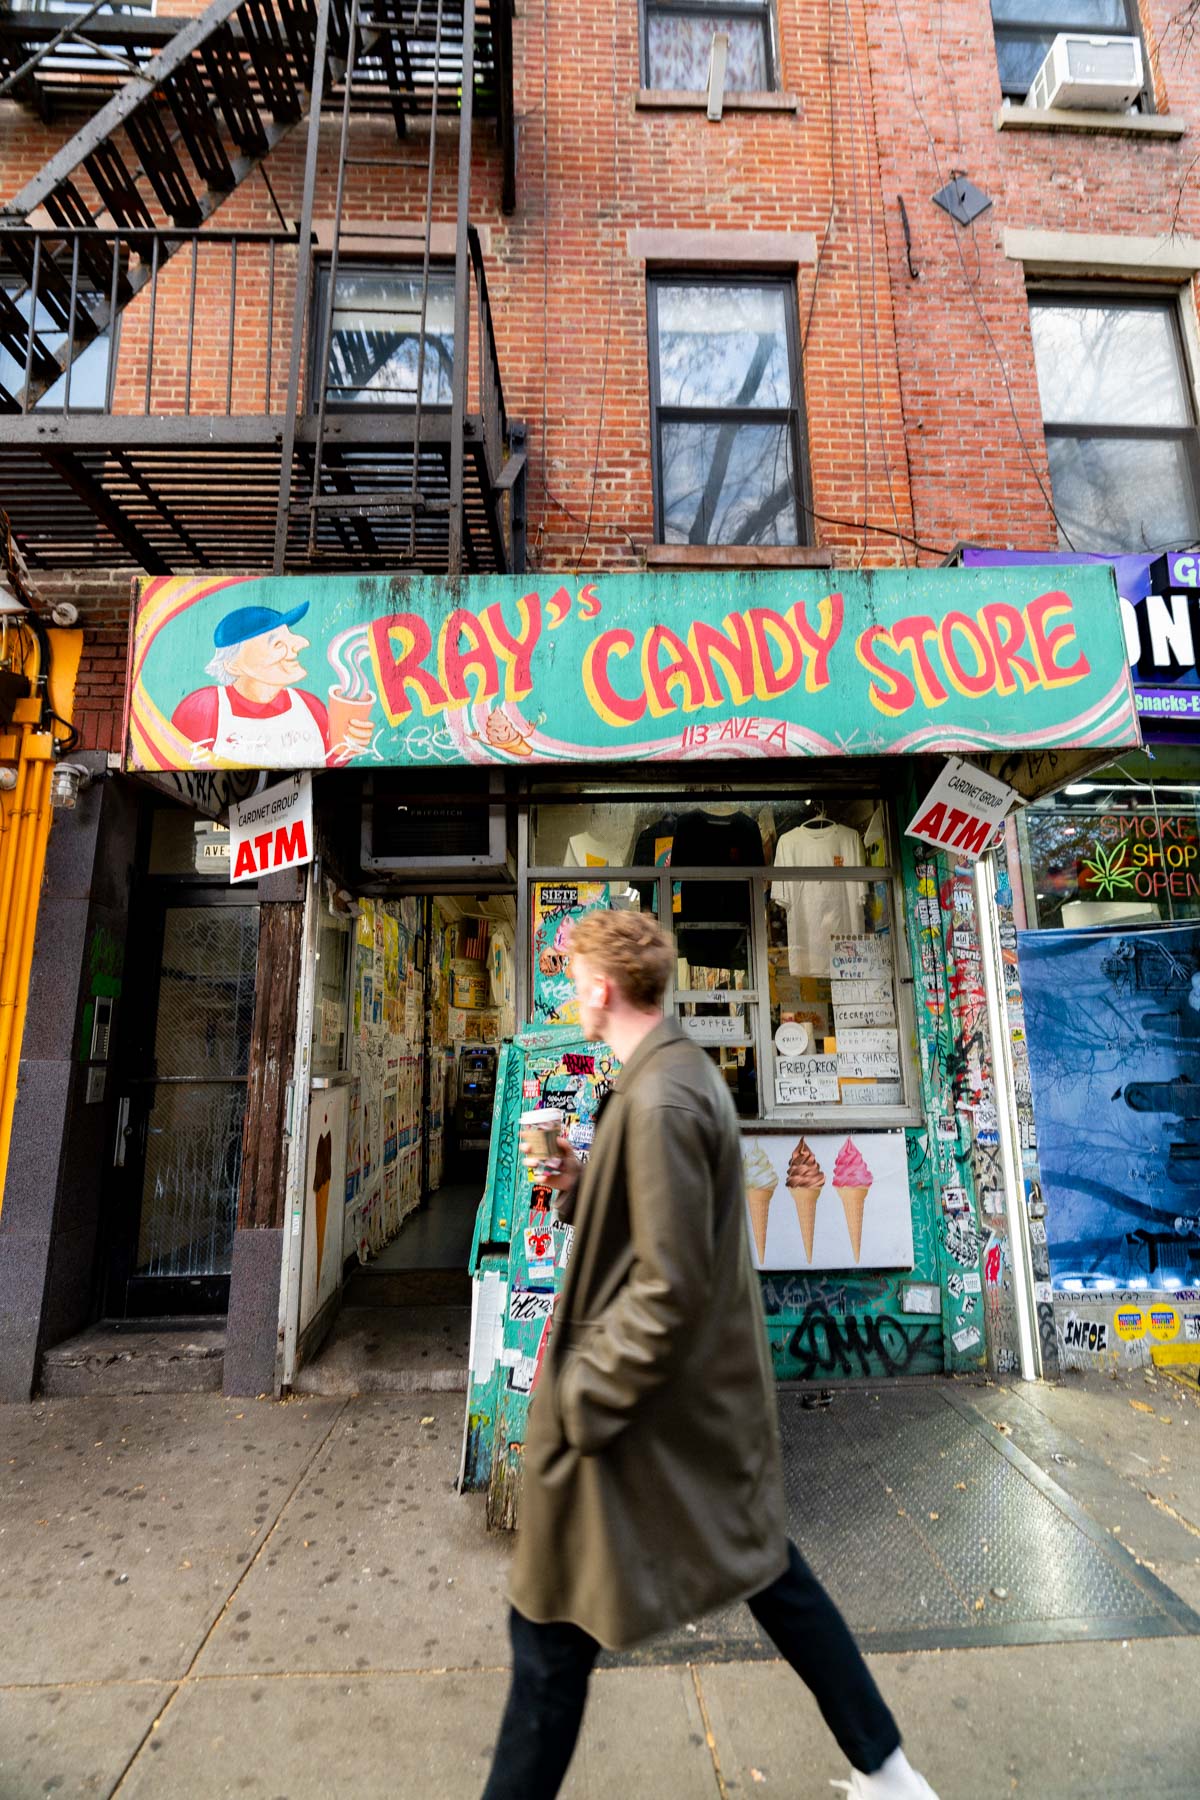 Ray's Candy Store, support mom & pop business owners day while visiting NYC in March